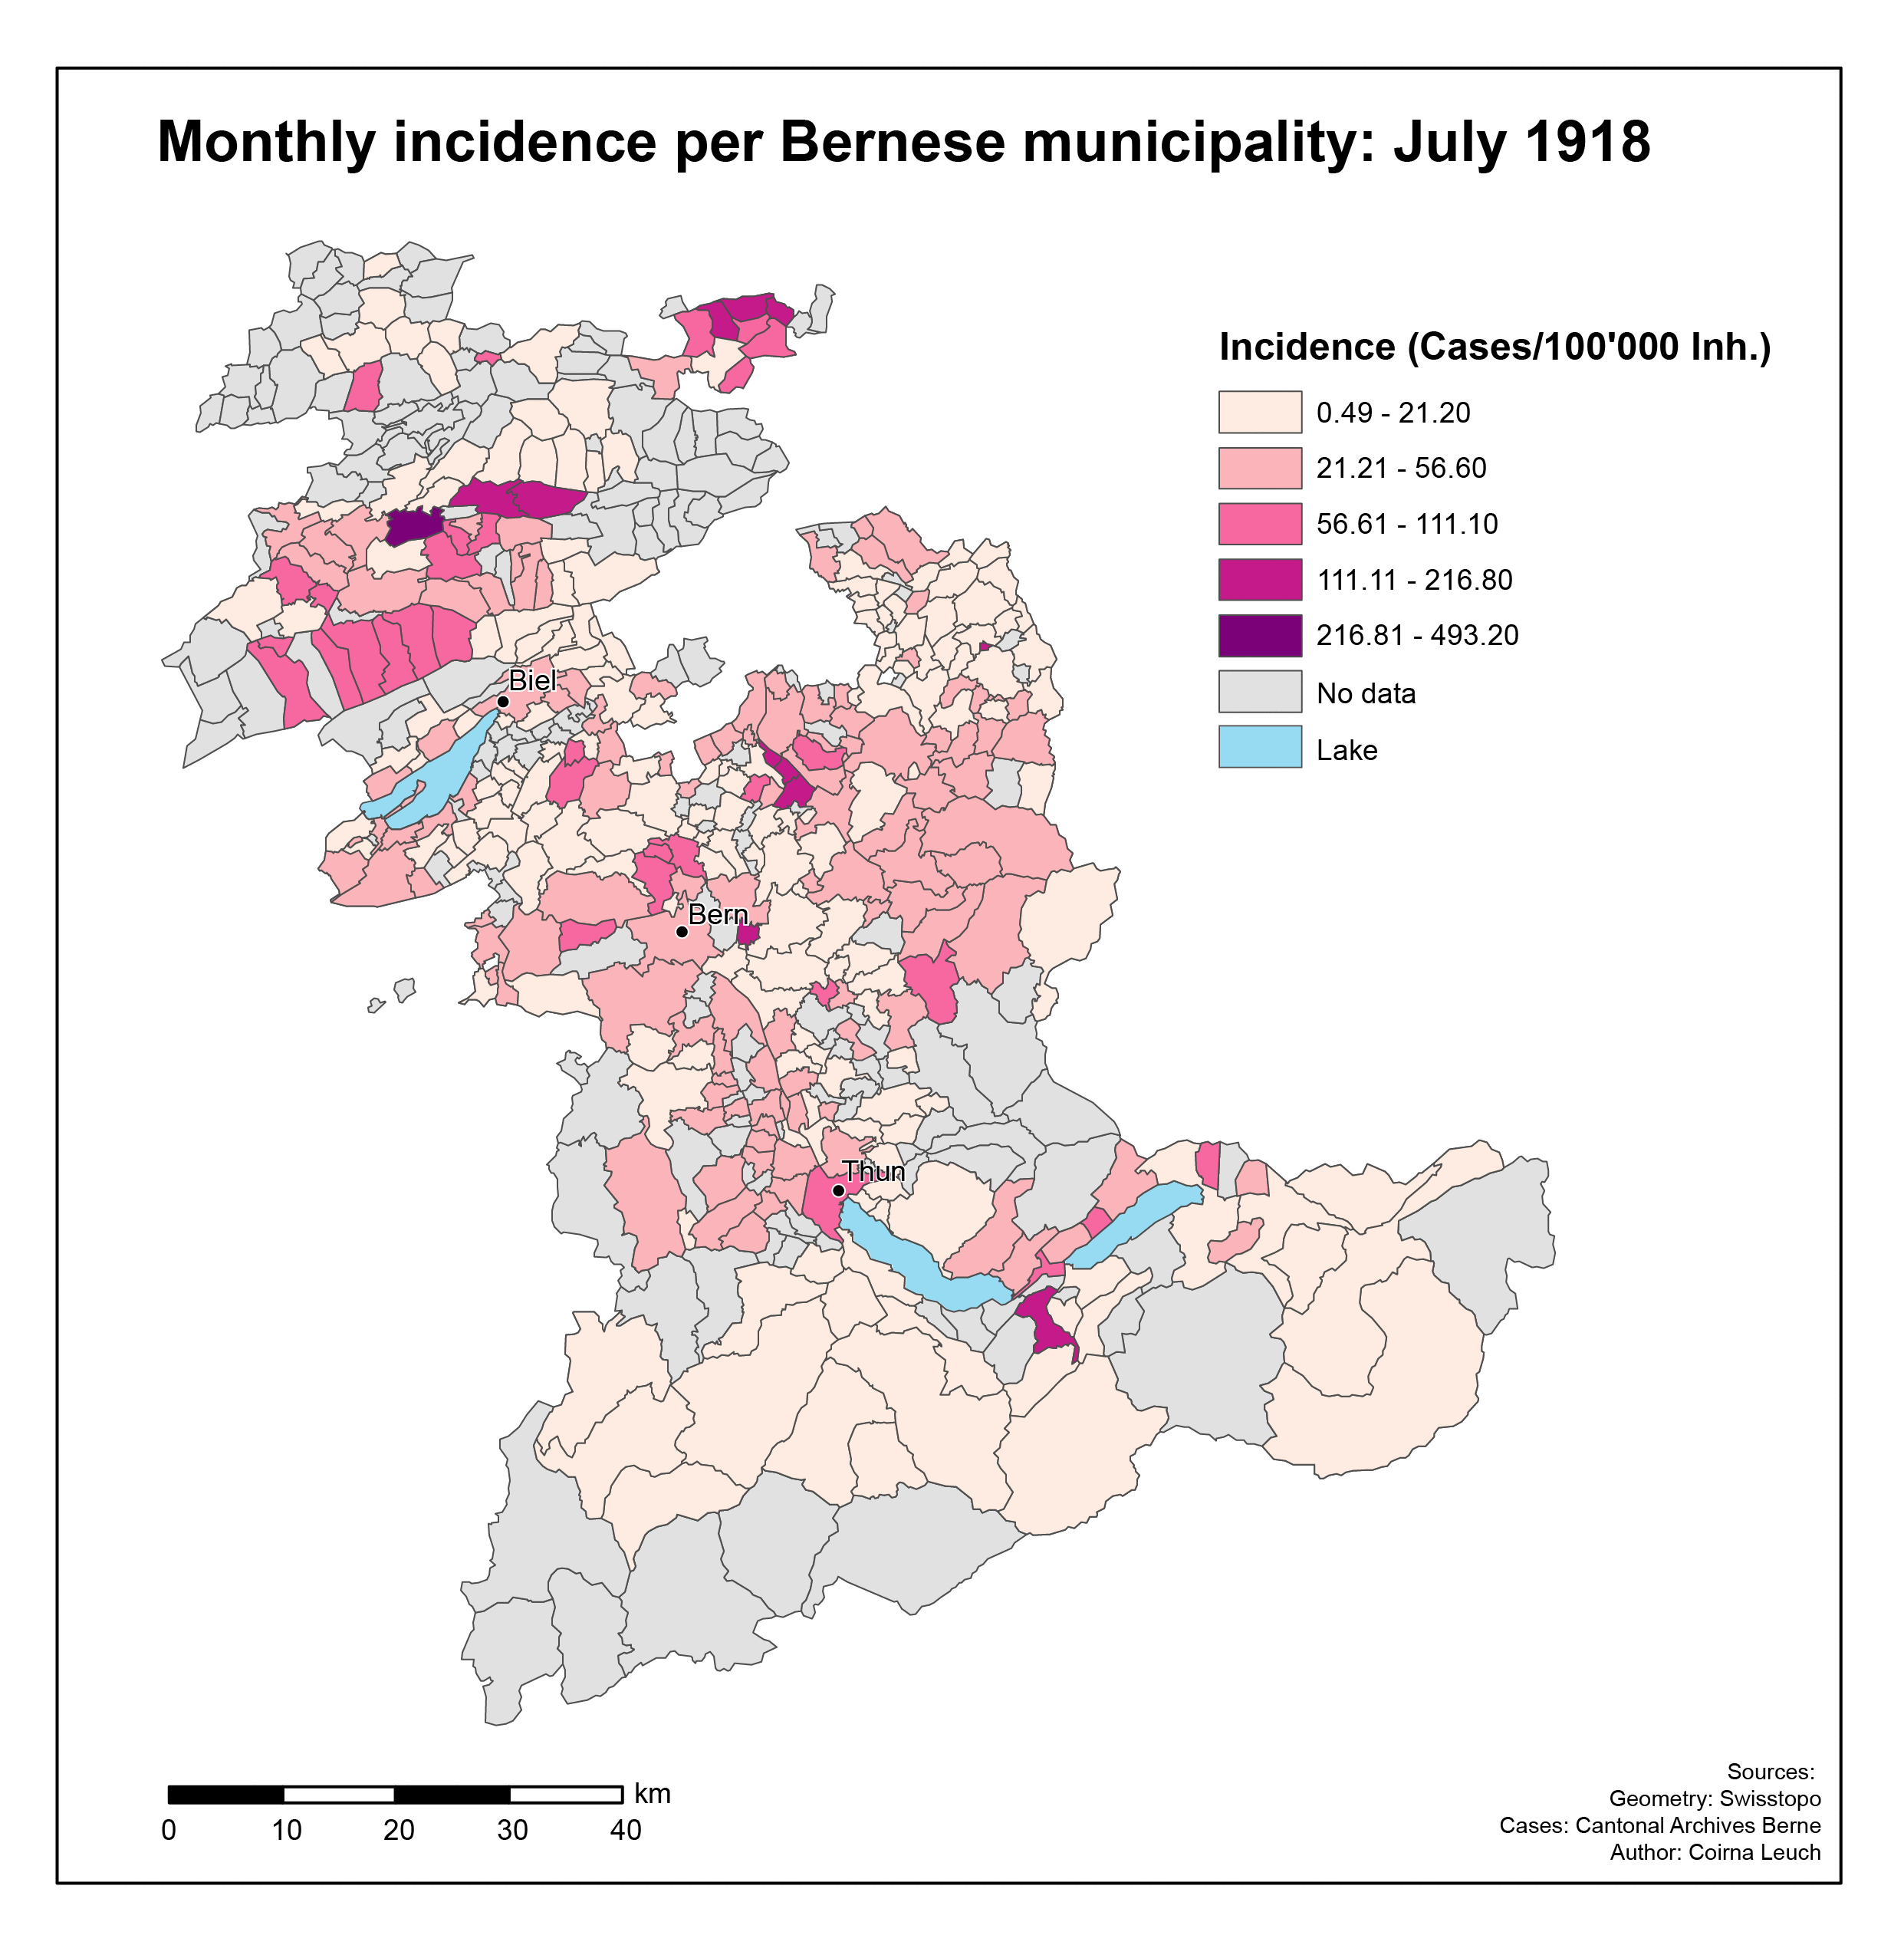 Monthly incidence in the communes of the canton of Bern, July 1918 - June 1919